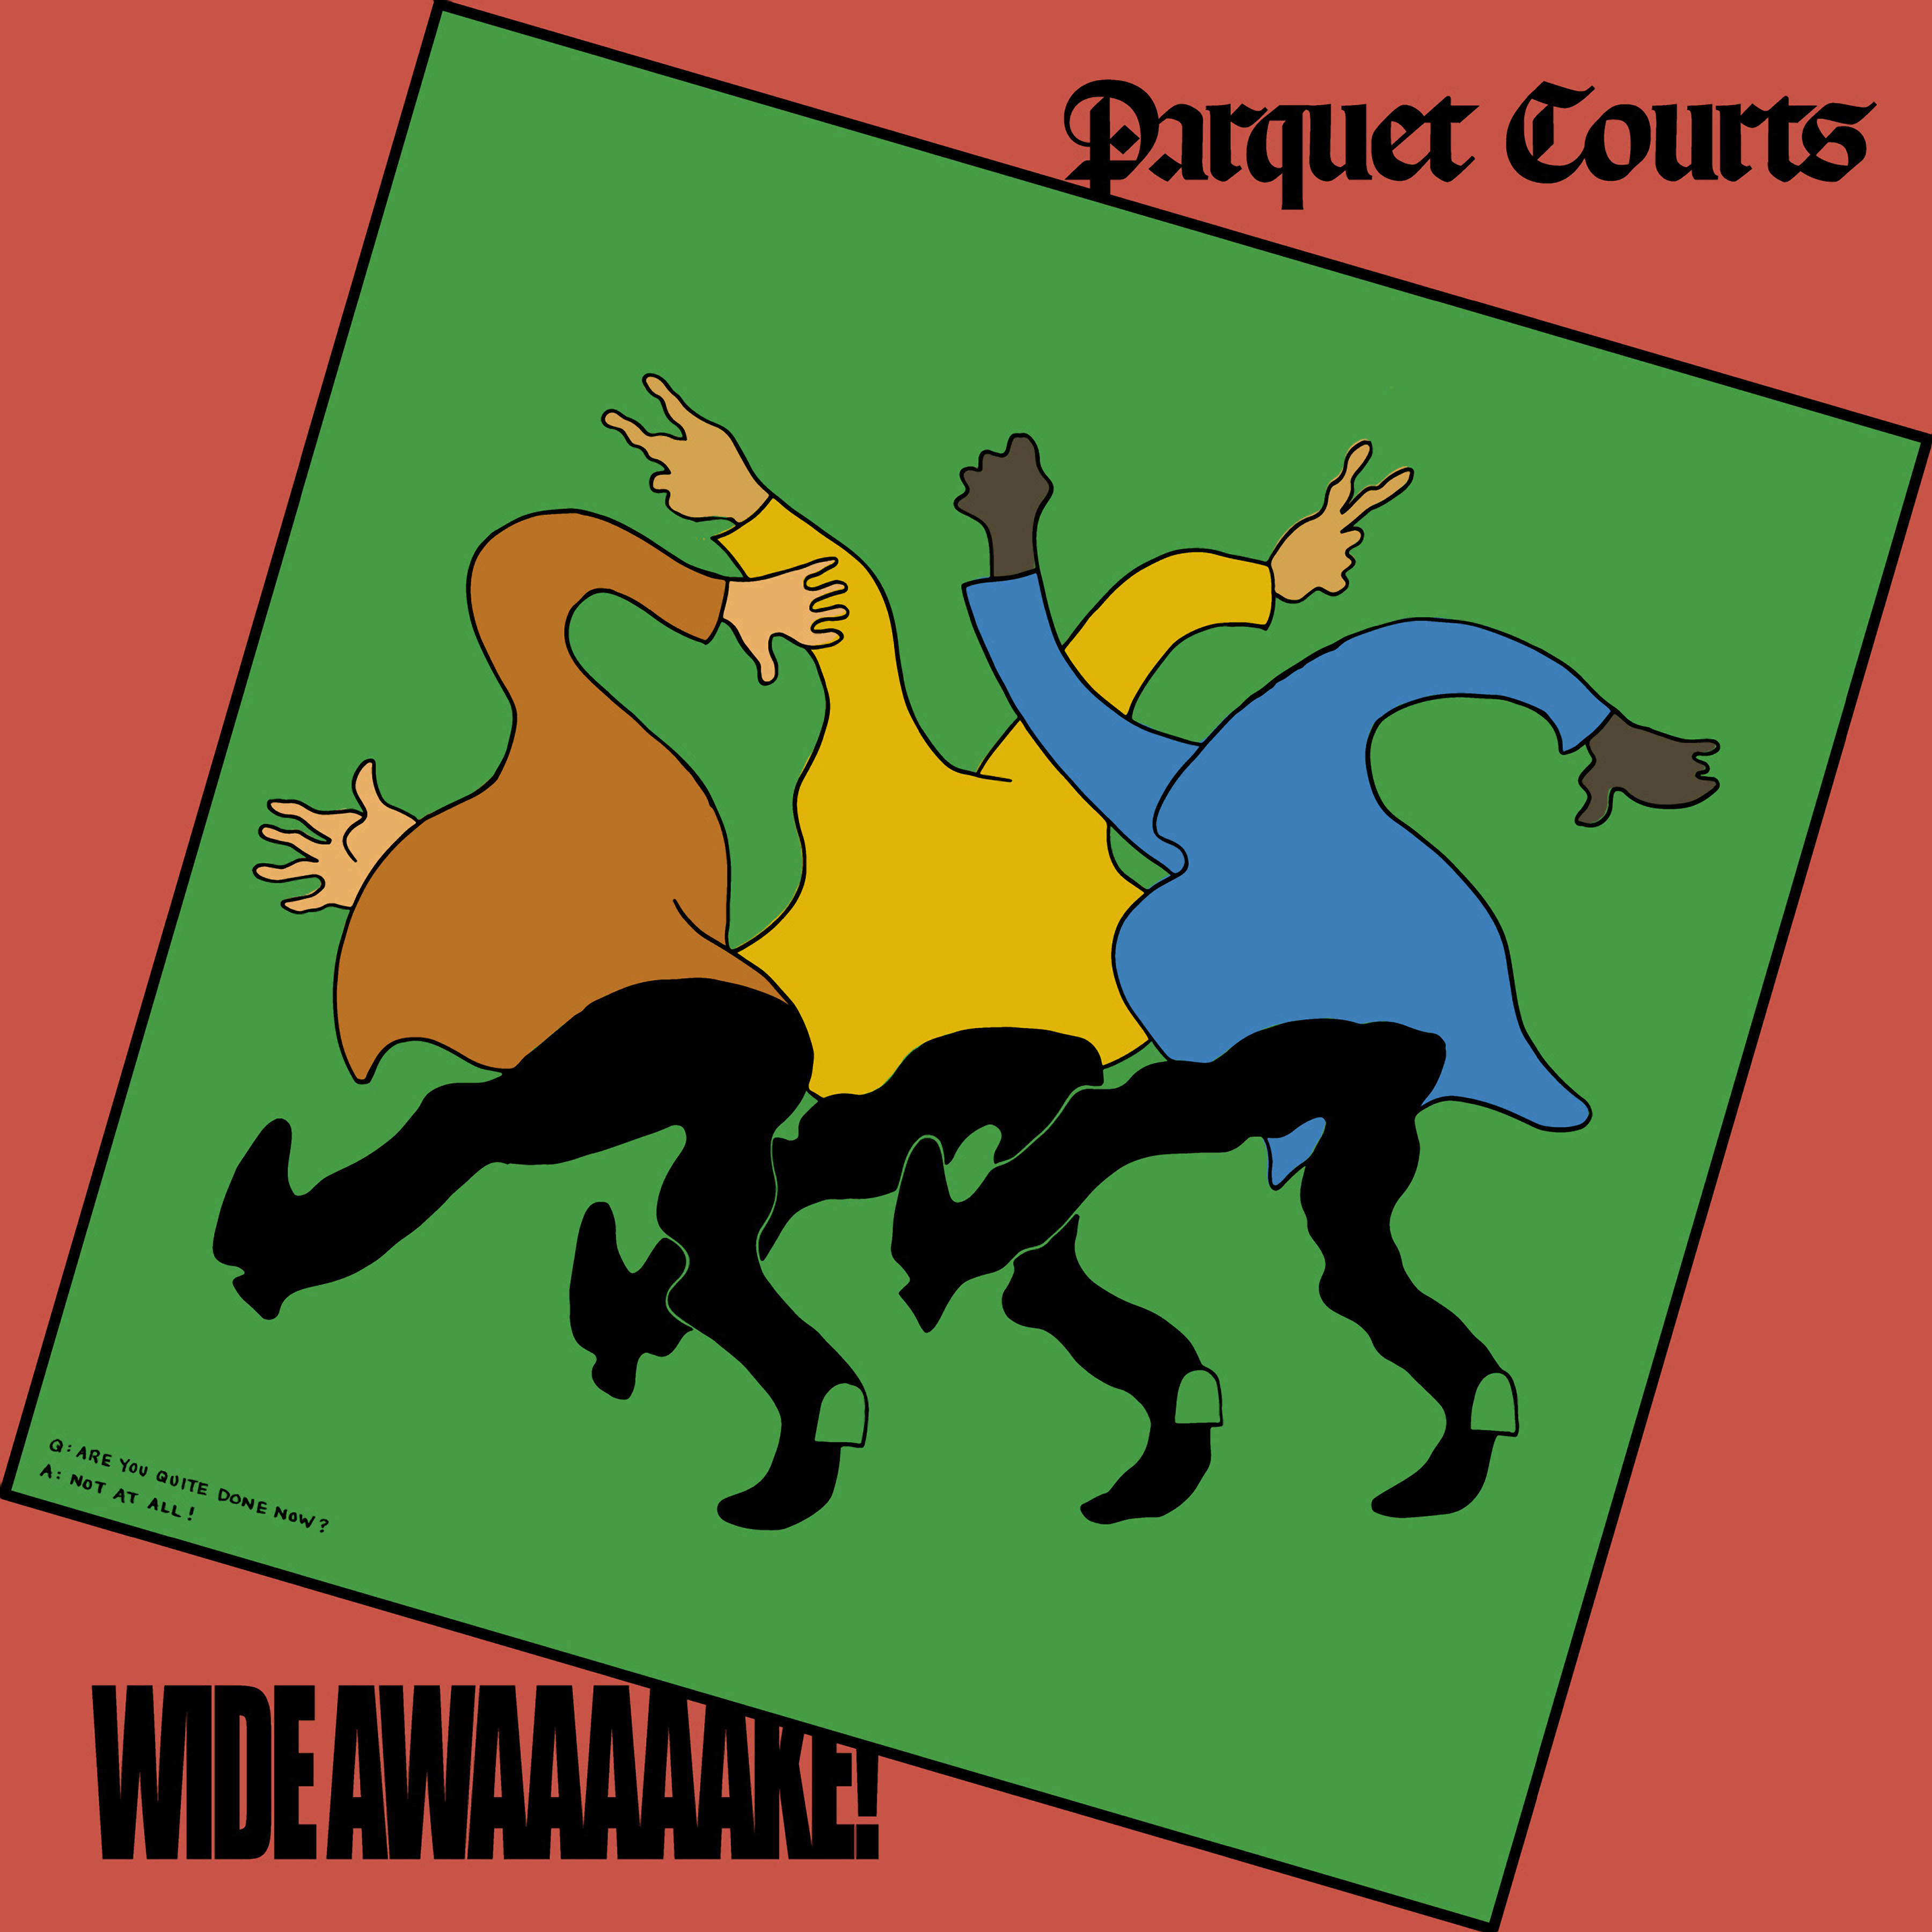 Parquet Courts Announce New Album <i></noscript>Wide Awake!</i>, Release “Almost Had to Start a Fight/In and Out of Patience”” title=”RT001_Parquet_Courts_Wide_Awake-1519311286″ data-original-id=”279517″ data-adjusted-id=”279517″ class=”sm_size_full_width sm_alignment_center ” data-image-source=”free_stock” /></p>
<p><strong>Parquet Courts, <em>Wide Awake! </em>track list<br />
</strong>1. “Total Football”<br />
2. “Violence”<br />
3. “Before the Water Gets Too High”<br />
4. “Mardi Gras Beads”<br />
5. “Almost Had to Start a Fight/In and Out of Patience”<br />
6. “Freebird II”<br />
7. “Normalization”<br />
8. “Back to Earth”<br />
9. “Wide Awake”<br />
10. “NYC Observation”<br />
11. “Extinction”<br />
12. “Death Will Bring Change”<br />
13. “Tenderness”</p>
</p></p>    <div class=